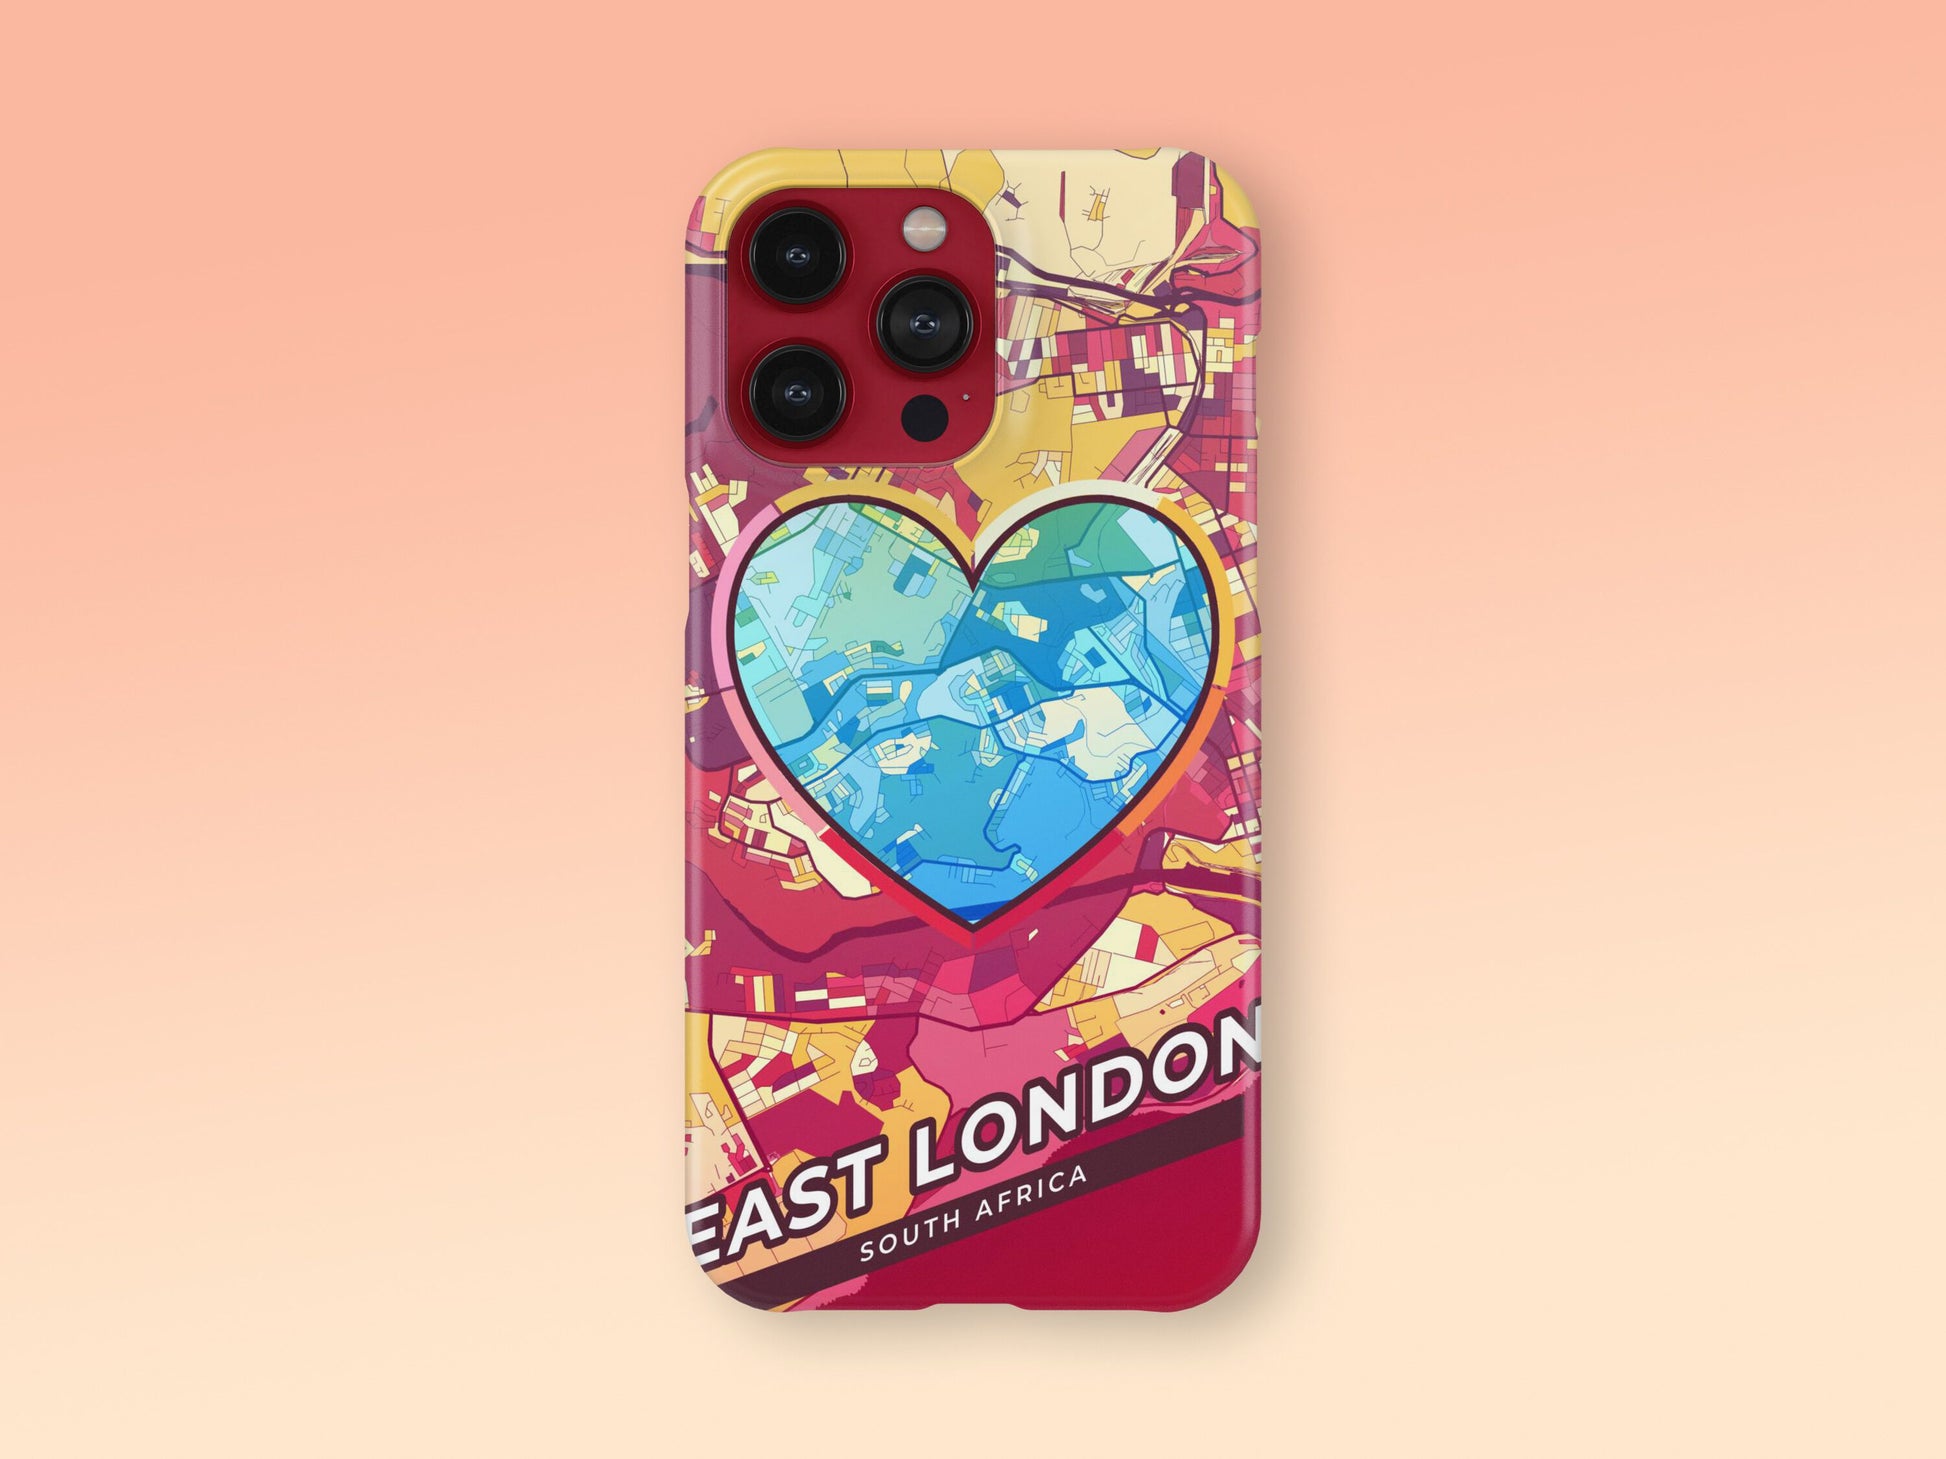 East London South Africa slim phone case with colorful icon. Birthday, wedding or housewarming gift. Couple match cases. 2